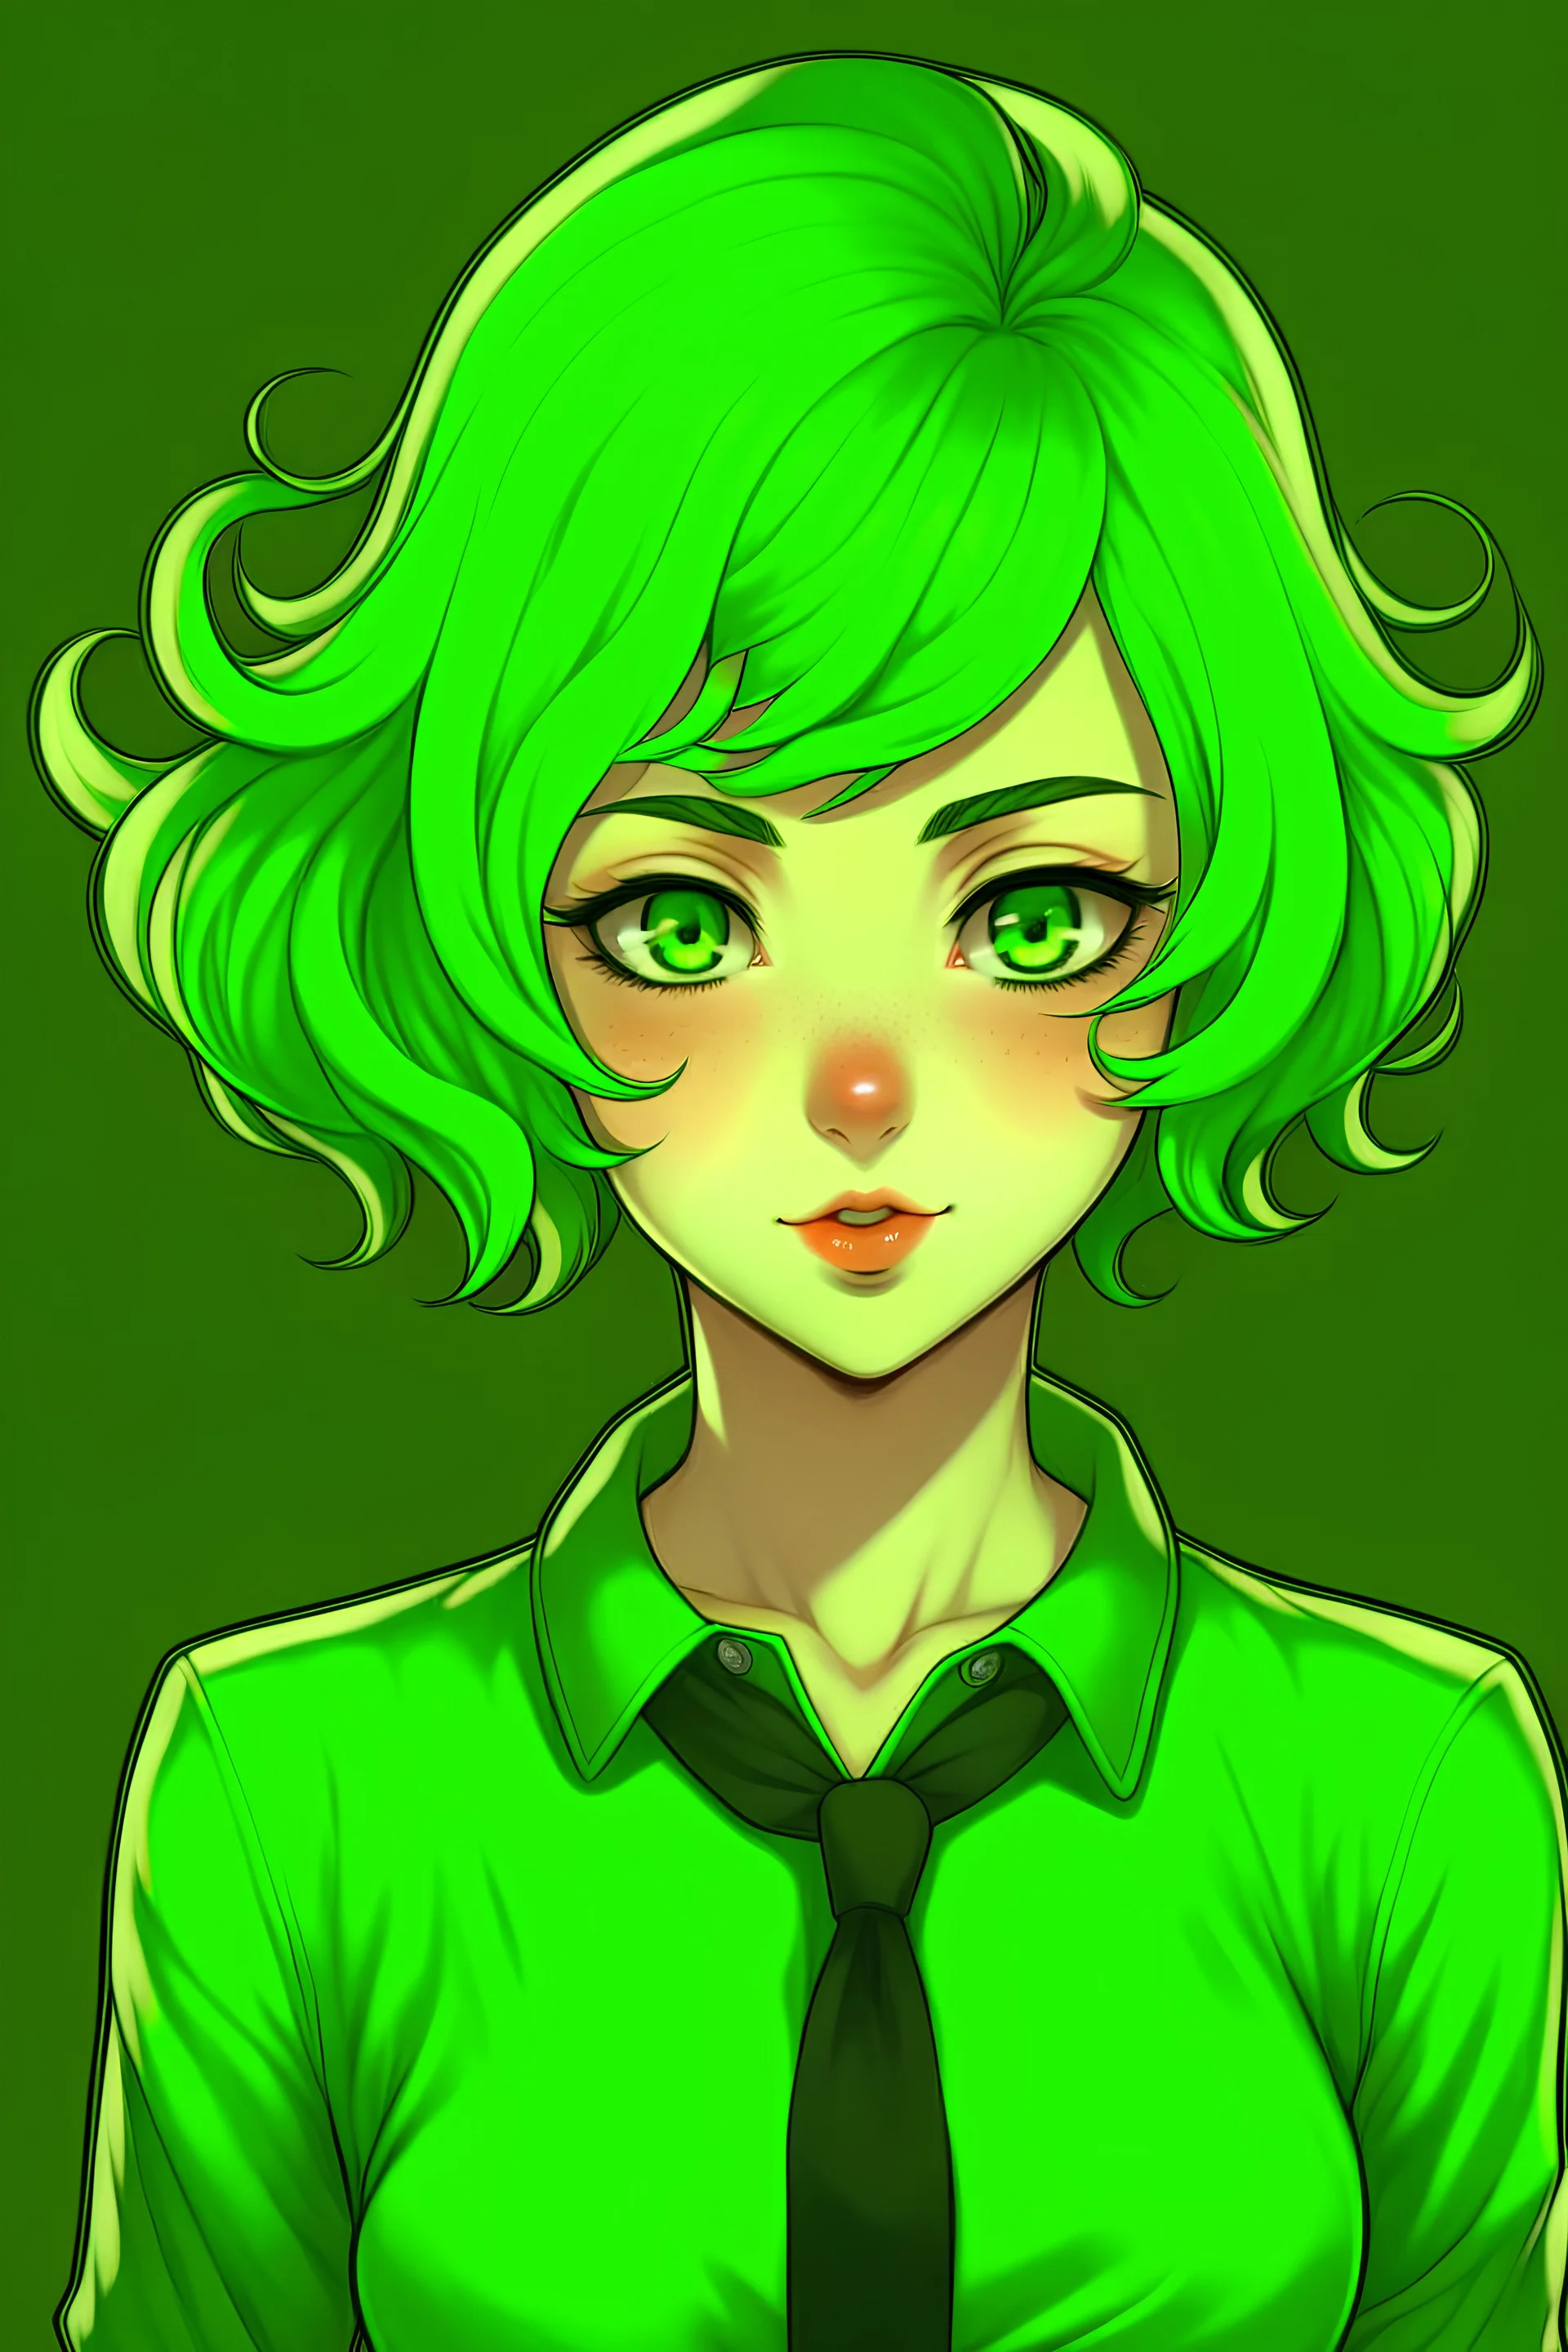 Beautiful Enfp girl with green wavy short hair She wears a green shirt with a black tie and bad girl style anime